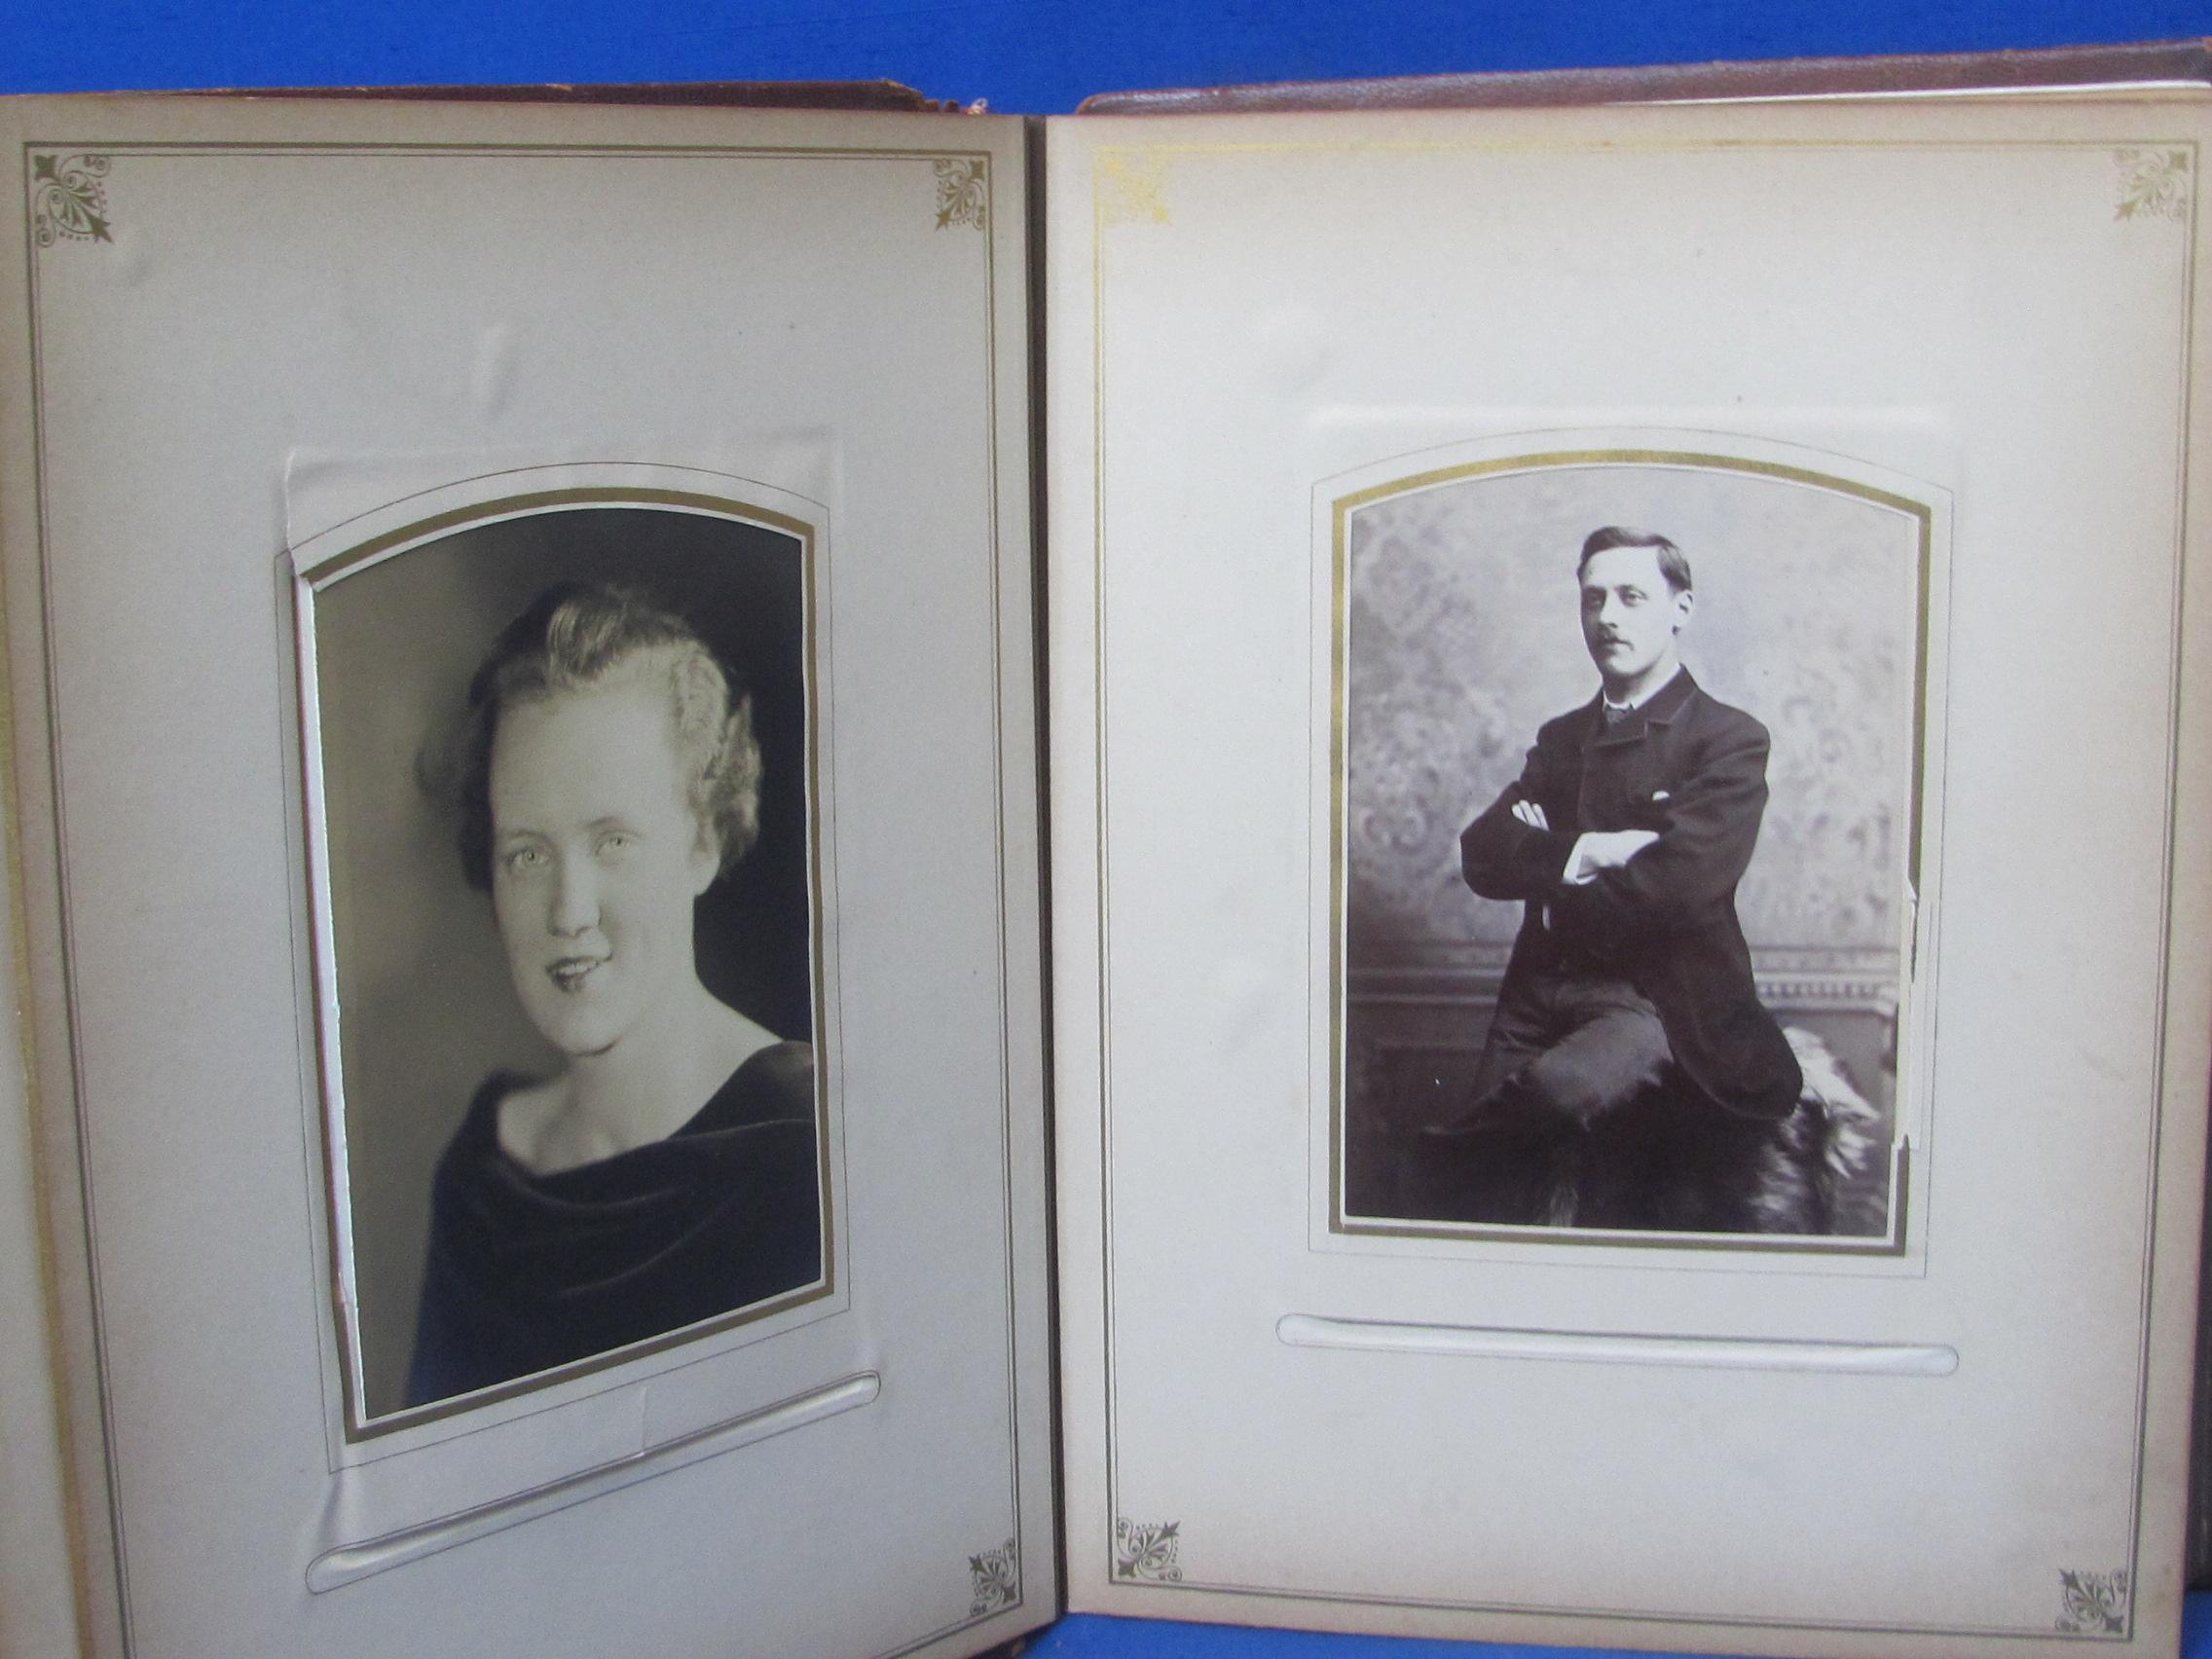 Antique Leather Bound Photograph Album – Full of Pictures - 1st Optical Illusion Skull/2 Little girl